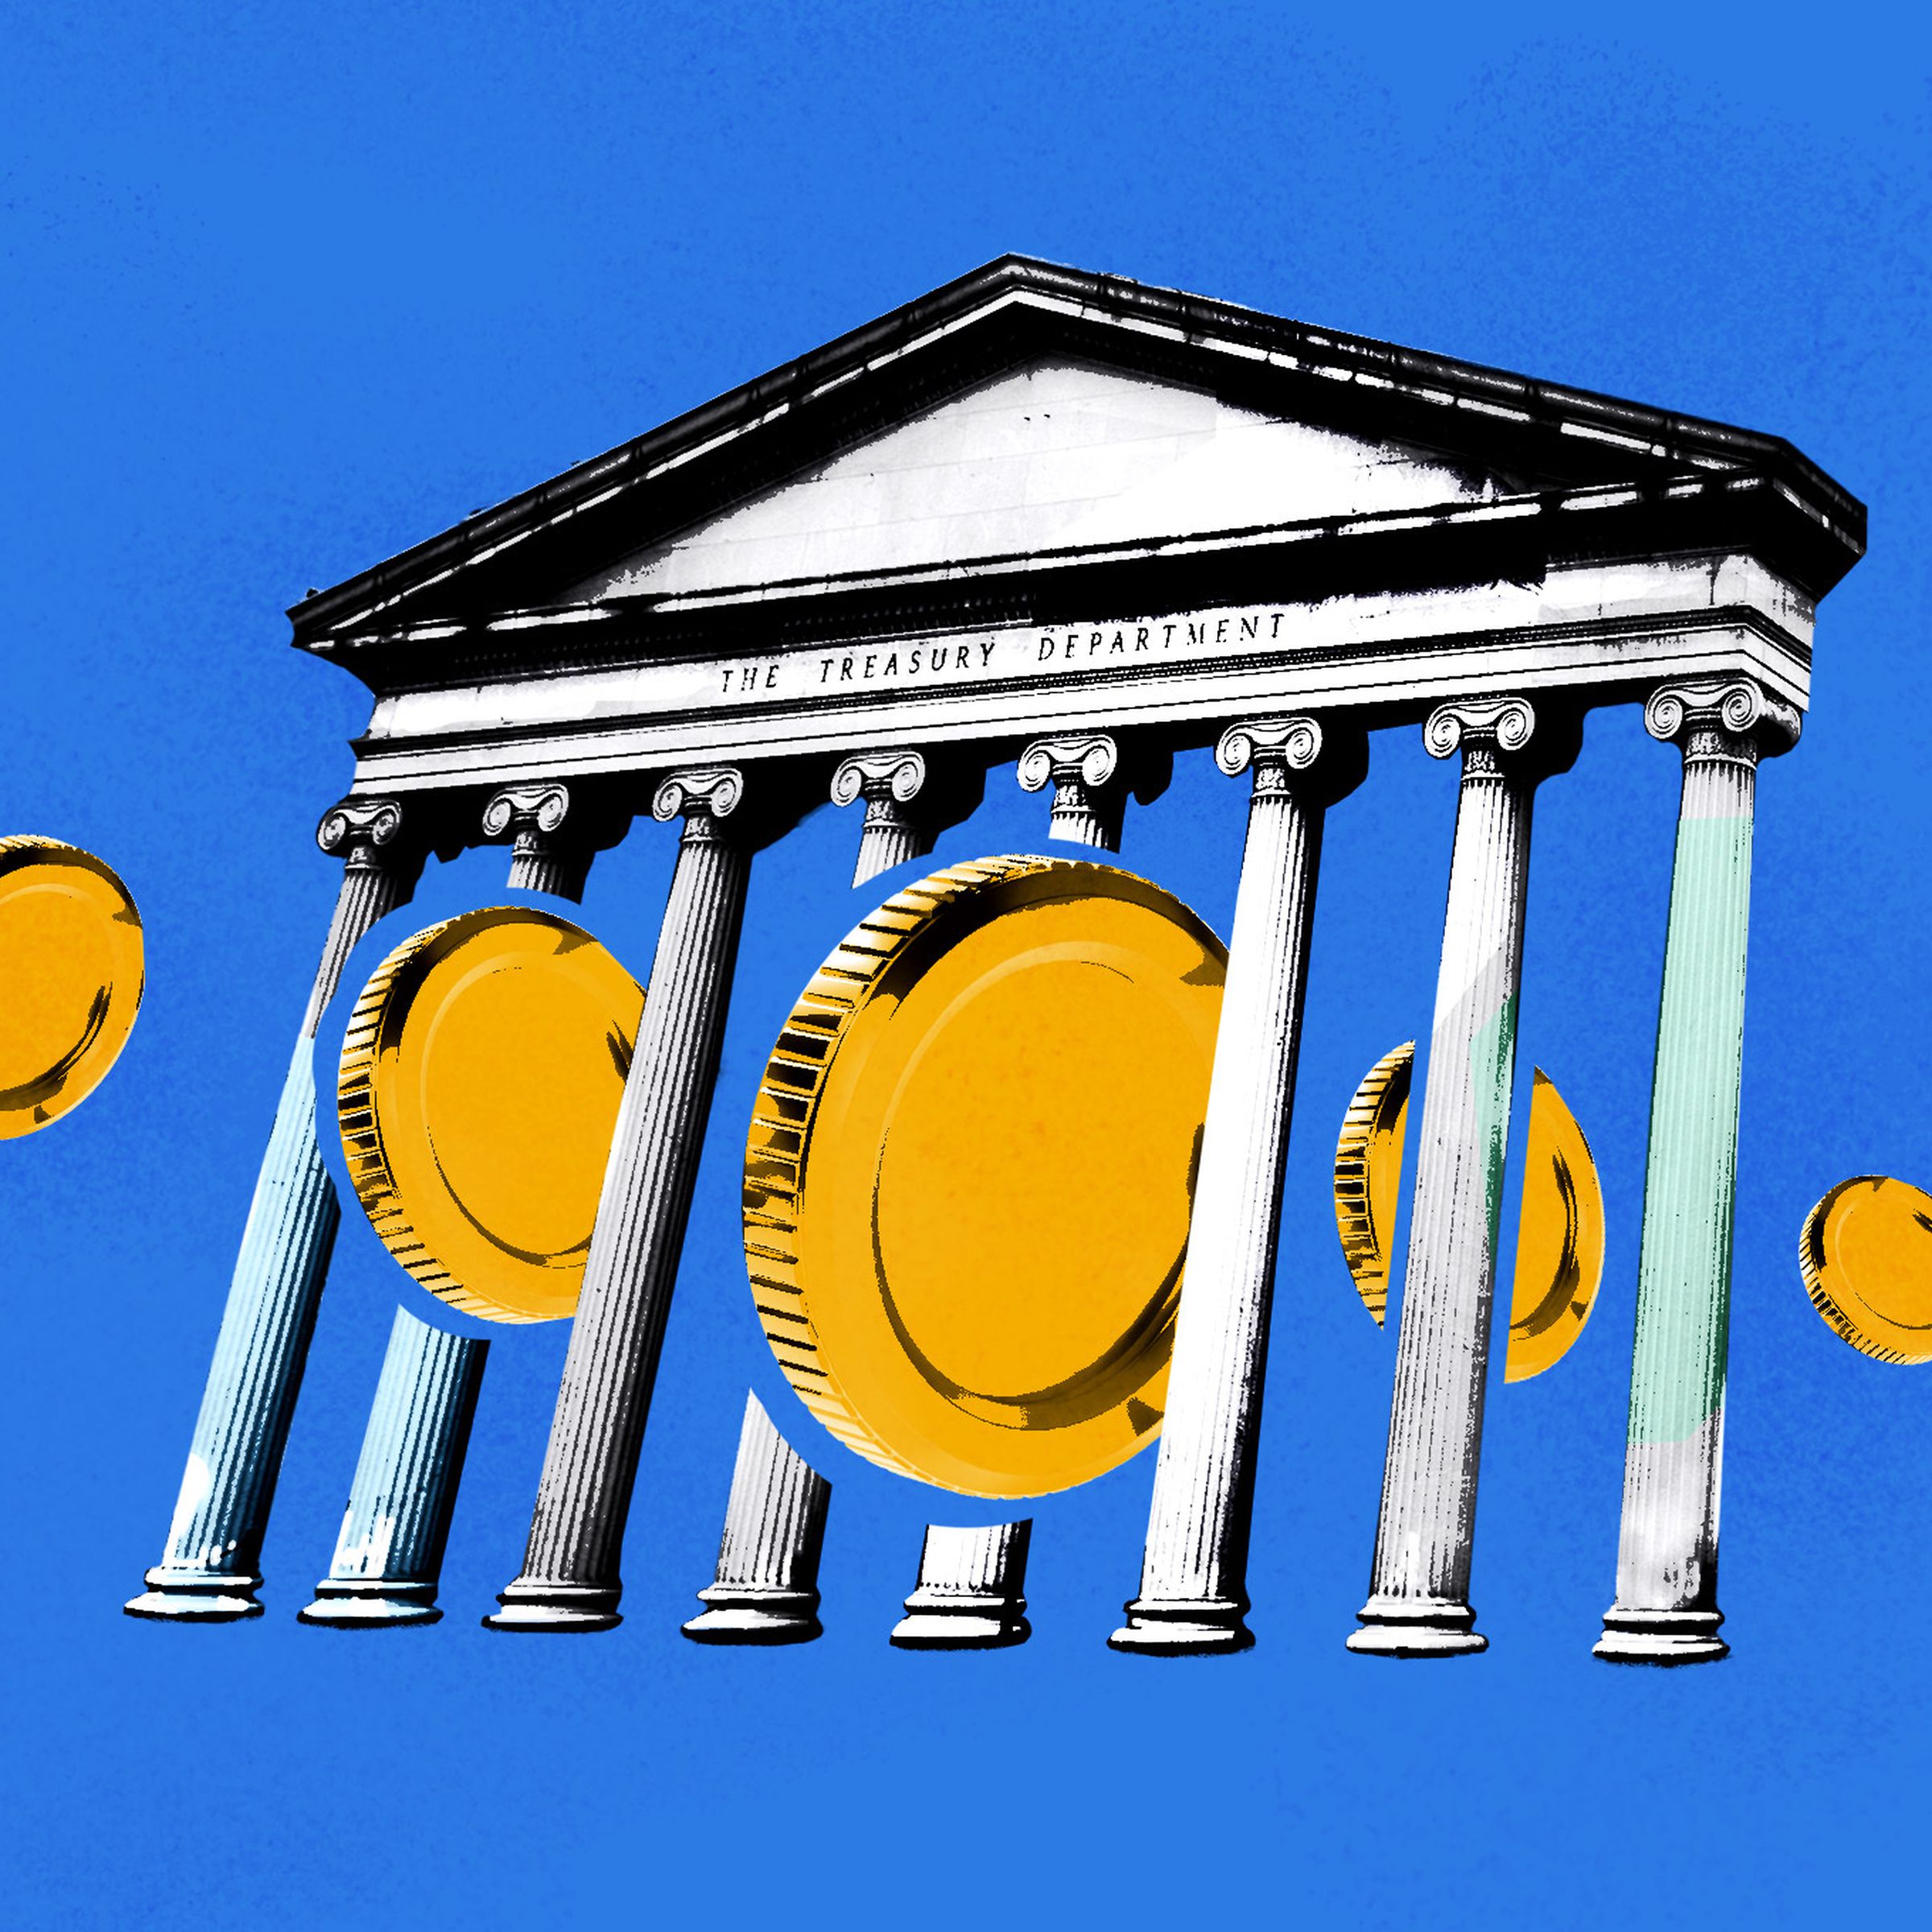 Illustration of coins passing through the pillars of the Supreme Court portico